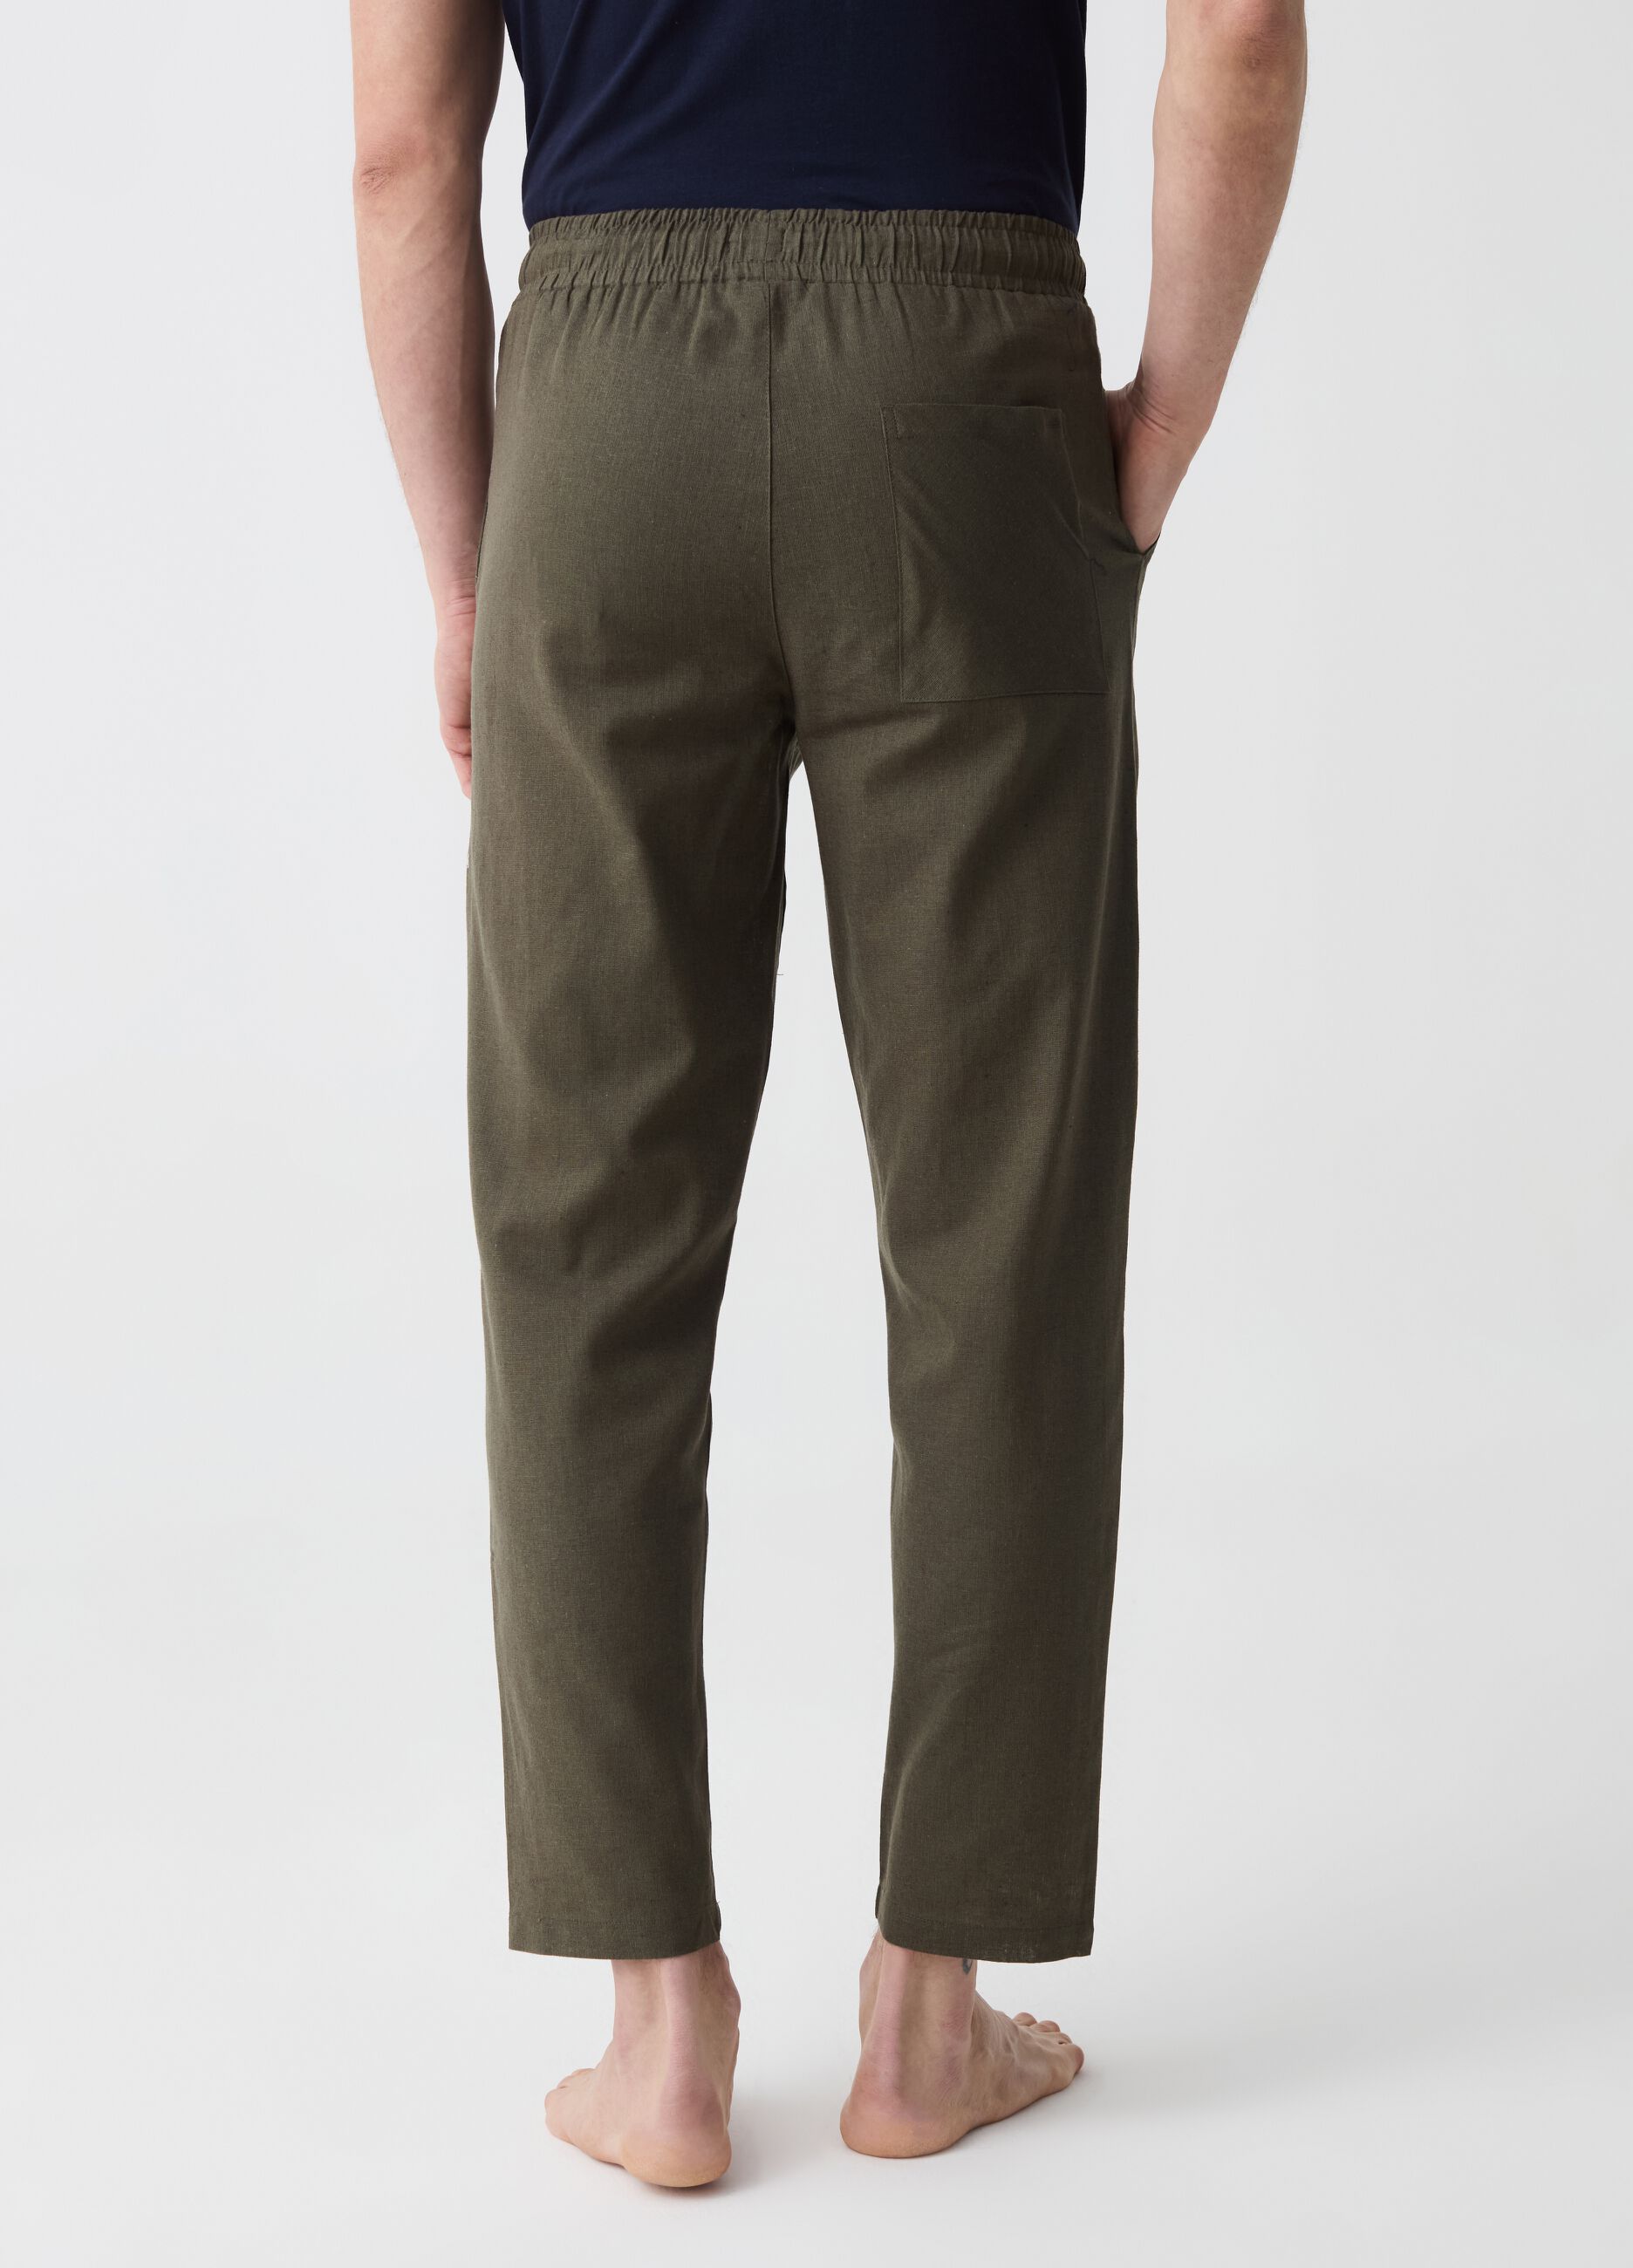 Long pyjama trousers in linen and cotton